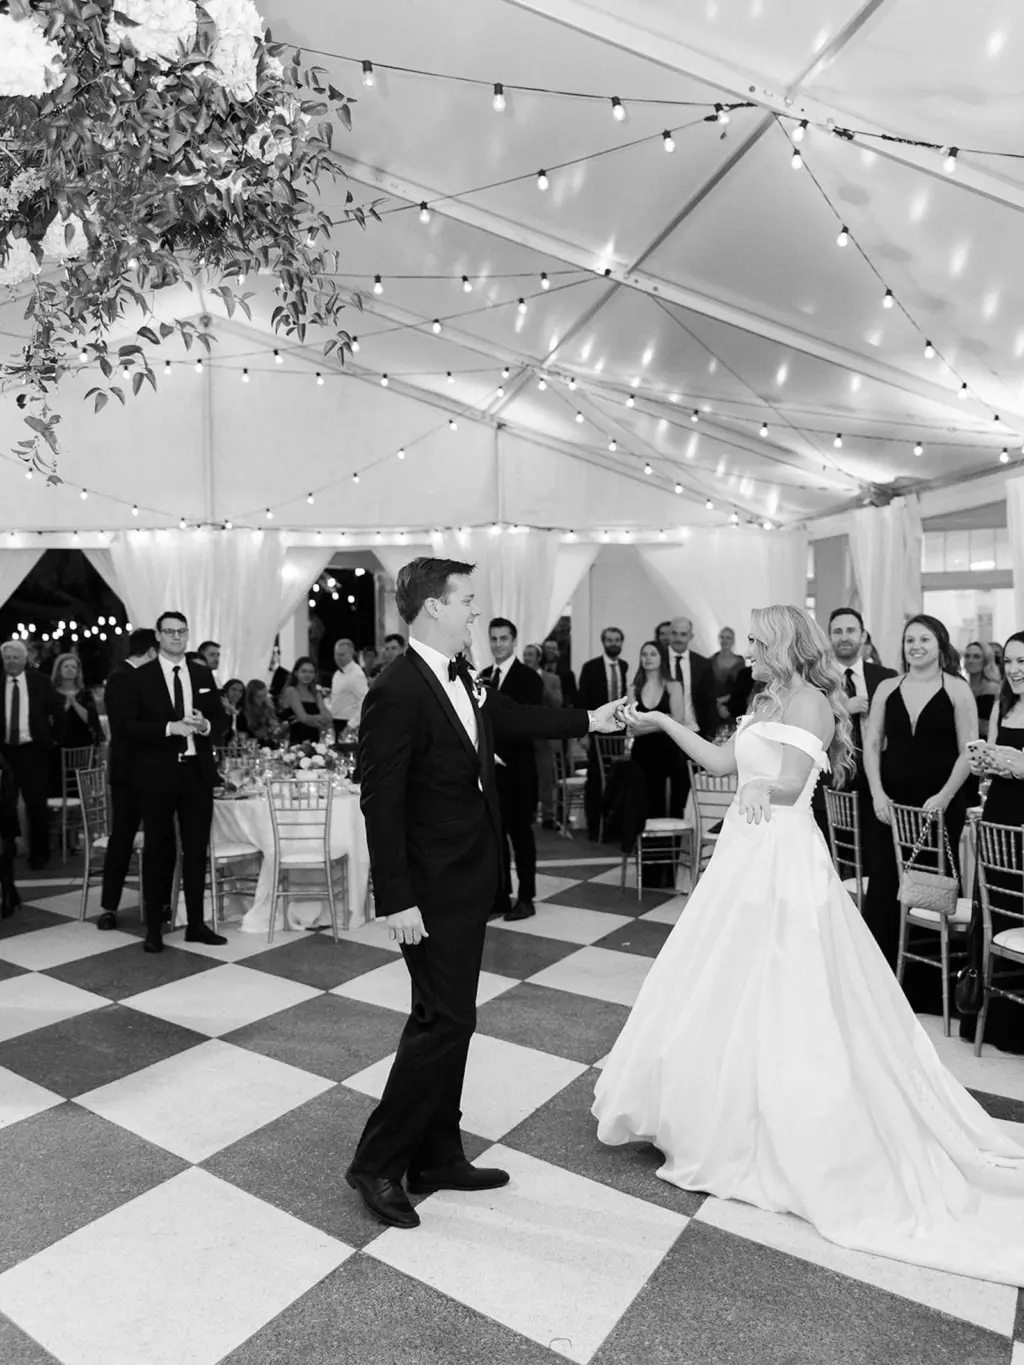 Bride and Groom First Dance Wedding Portrait | Black and White Checkered Dance Floor Inspiration